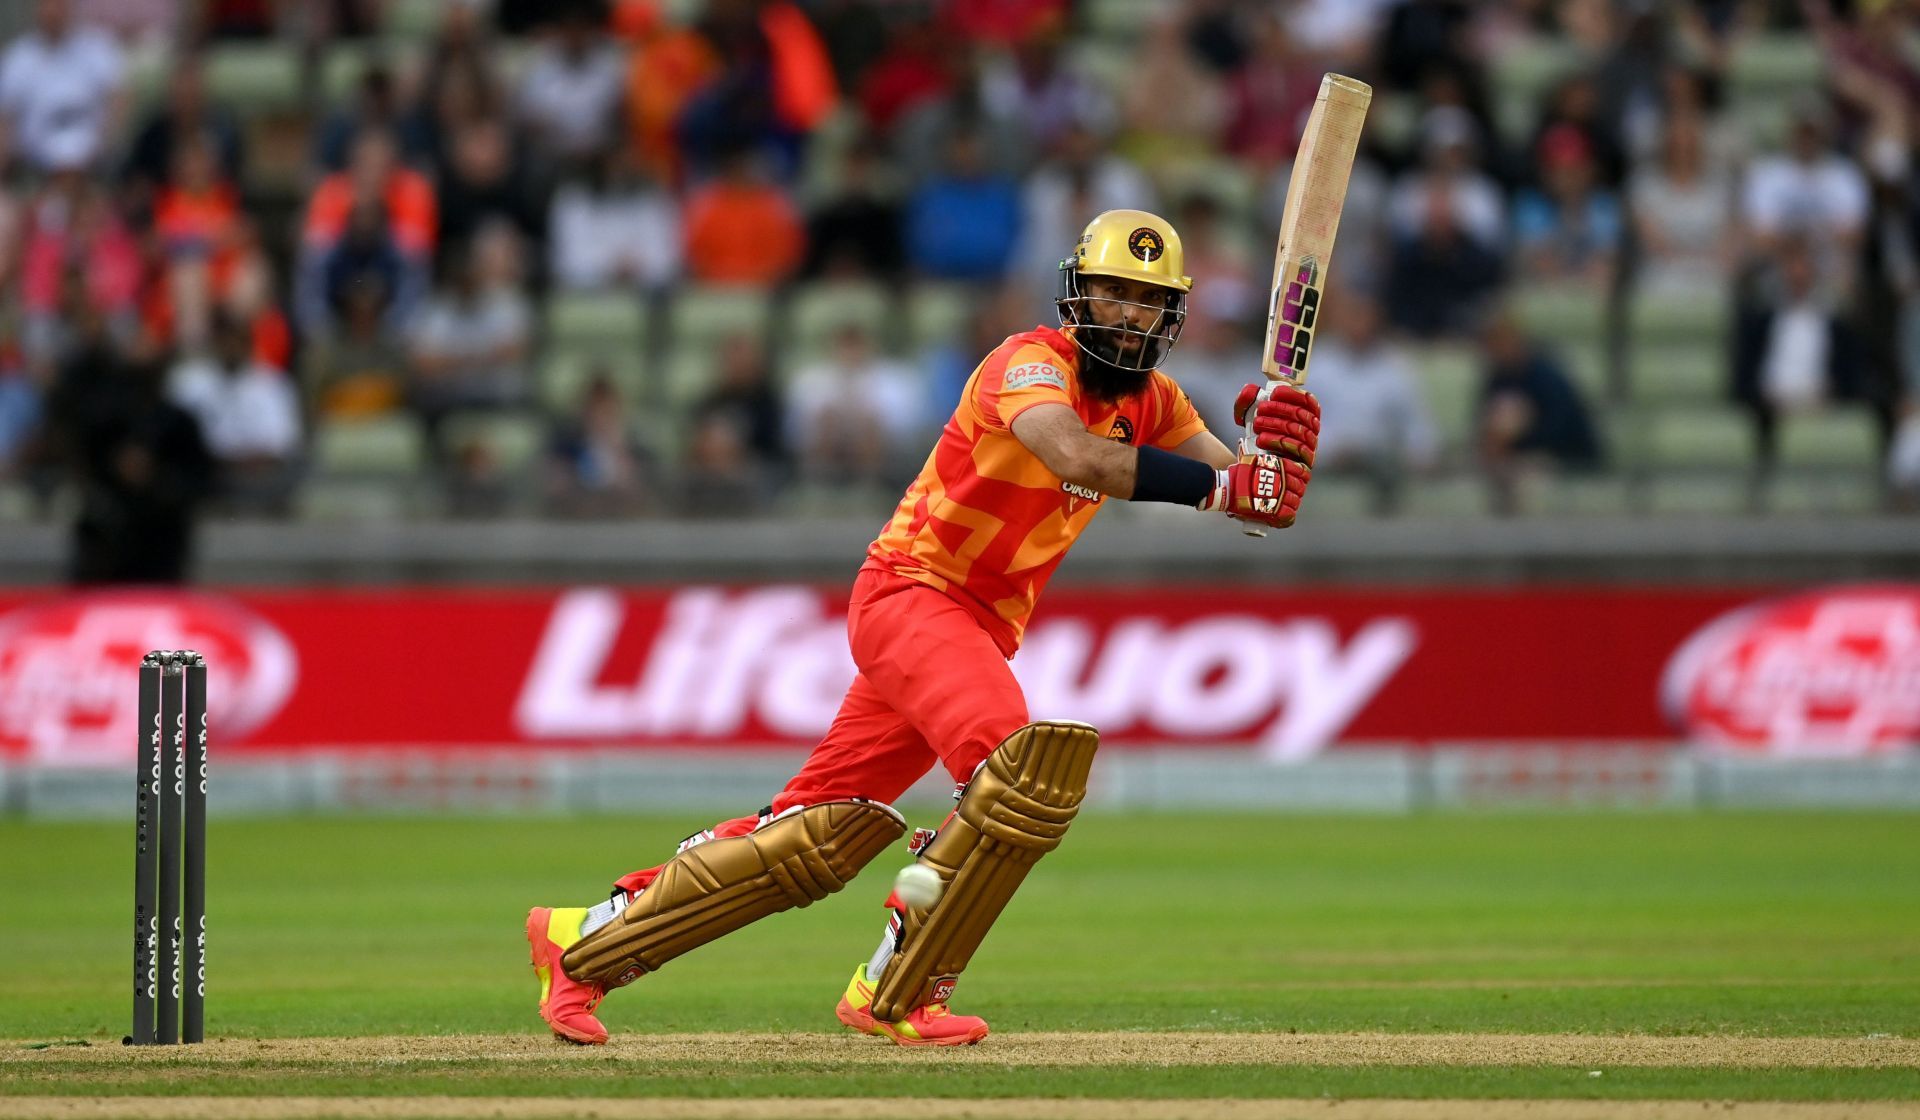 CSK&#039;s newest acquisition, Moeen Ali, was flamboyance personified right through the 14th season of the IPL (Pic credits: The Quint/BCCI/IPL)